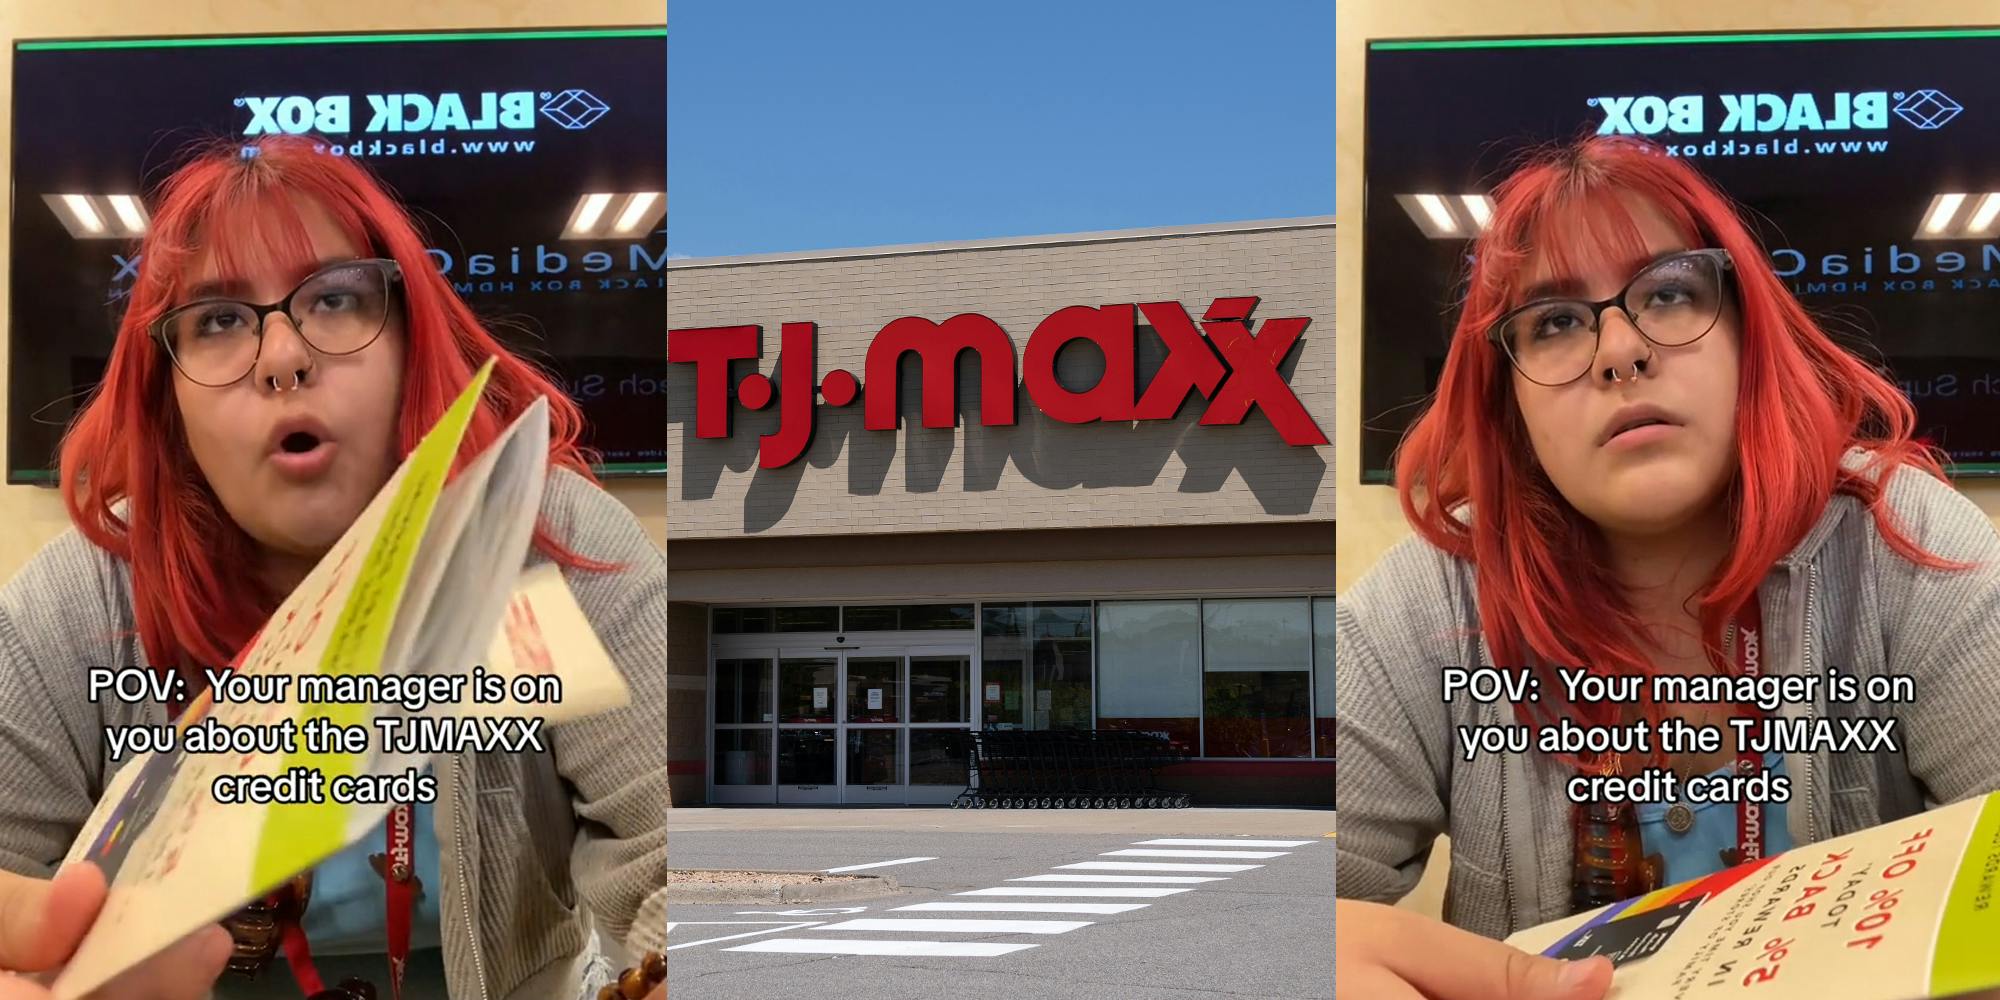 TJ Maxx worker speaking with pamphlet with caption "POV: Your manager is on you about the TJMAXX credit cards" (l) TJ MAXX building with sign (c) TJ Maxx worker speaking with pamphlet with caption "POV: Your manager is on you about the TJMAXX credit cards" (r)